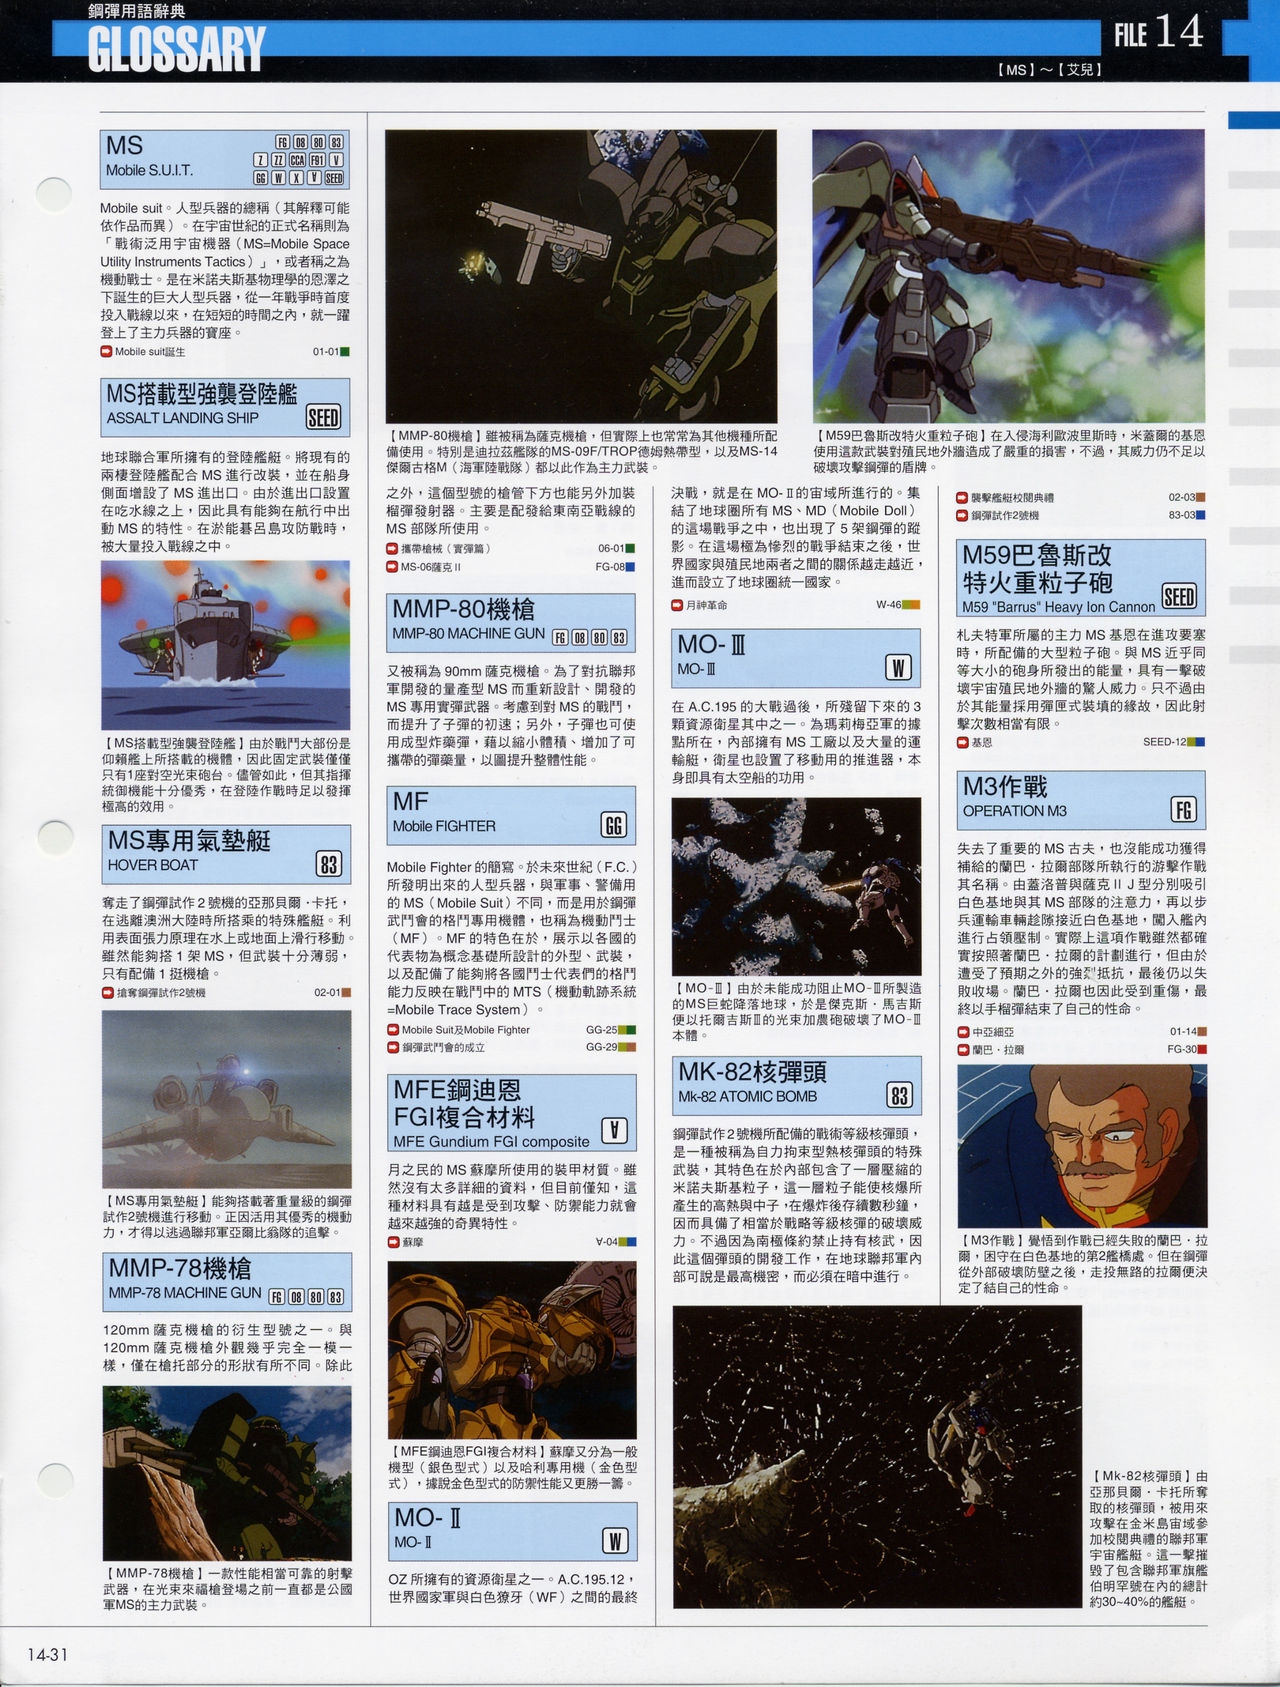 The Official Gundam Fact File - 014 [Chinese] 33